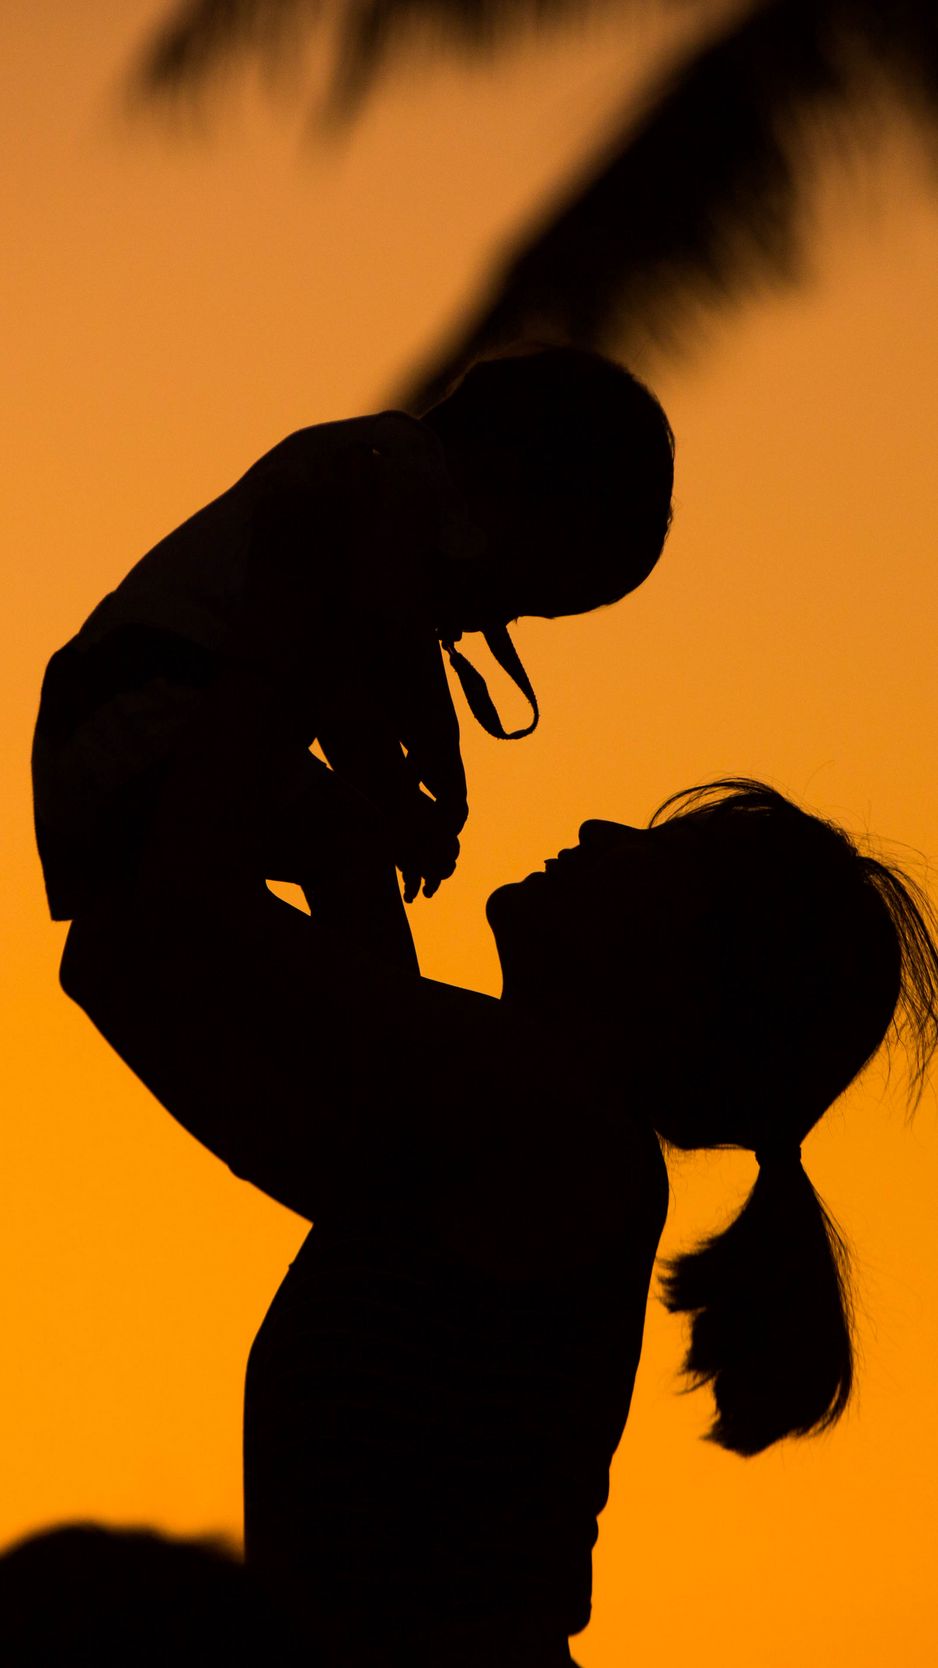 Download wallpaper 938x1668 silhouettes, mother, child, sunset iphone  8/7/6s/6 for parallax hd background